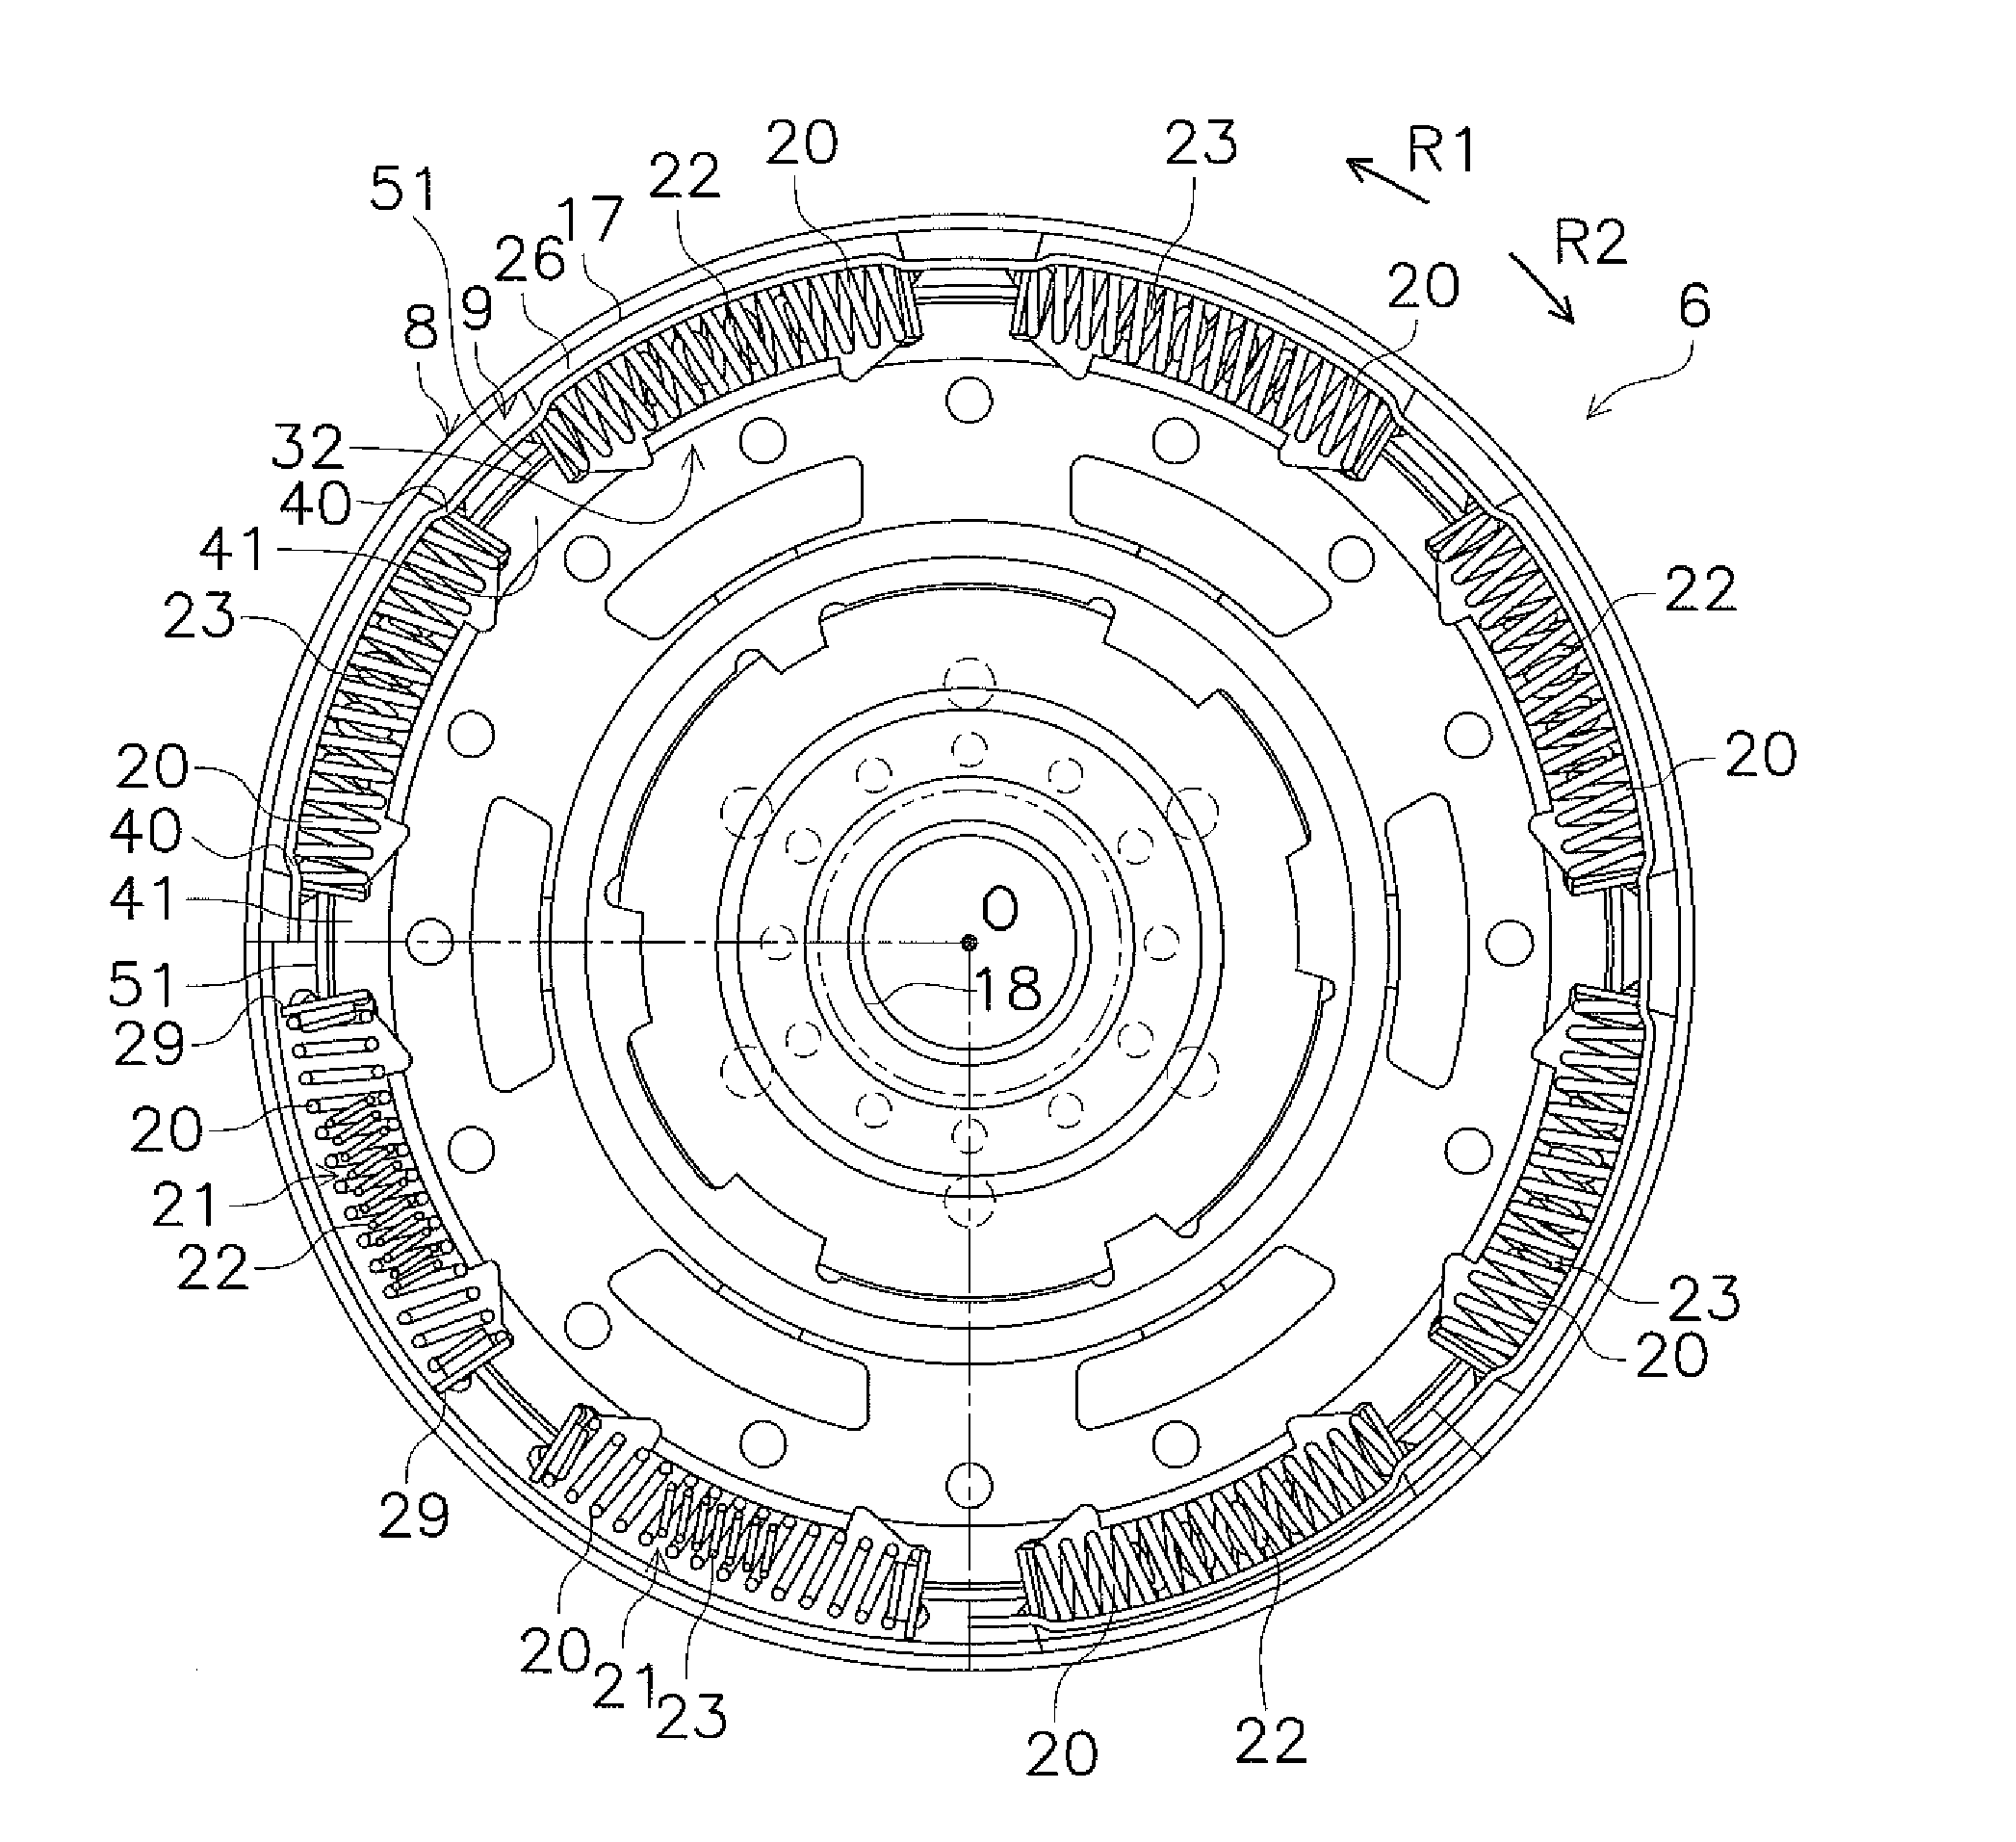 Lock-Up Device For Torque Converter